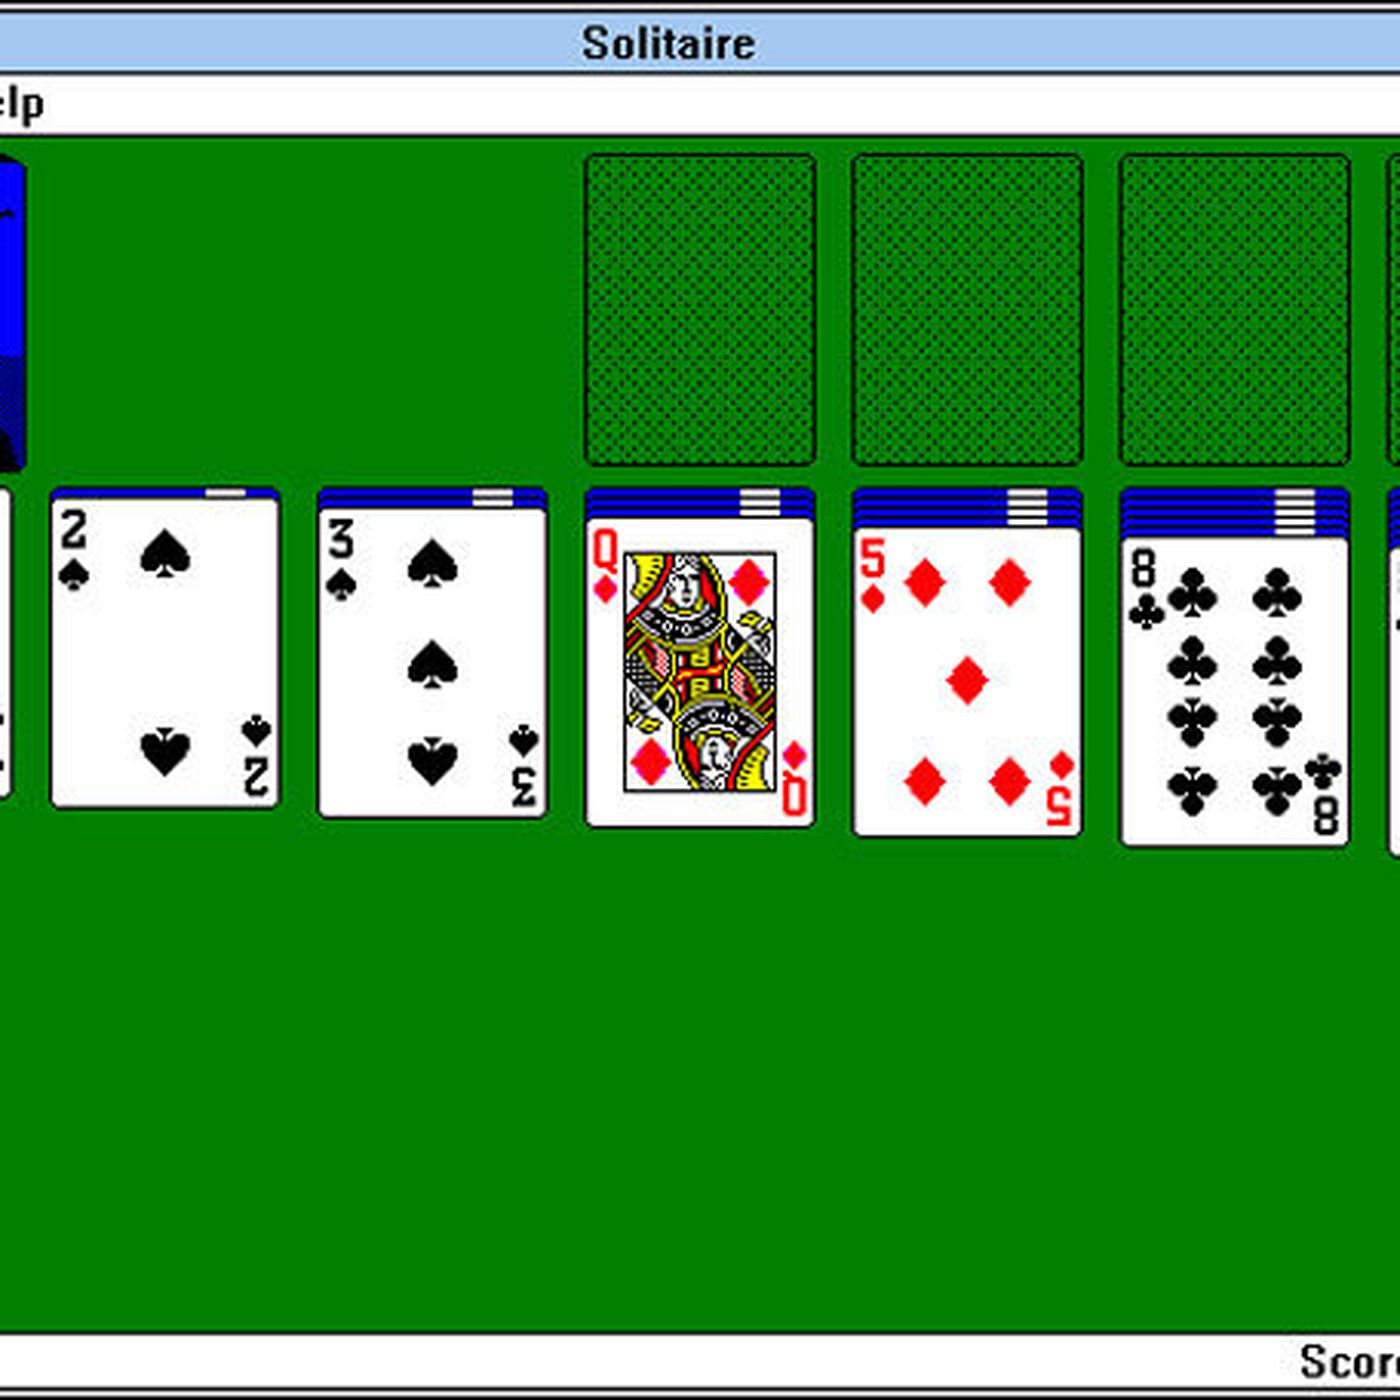 Netelig Generaliseren Postbode Microsoft Solitaire inducted into World Video Game Hall of Fame - The Verge